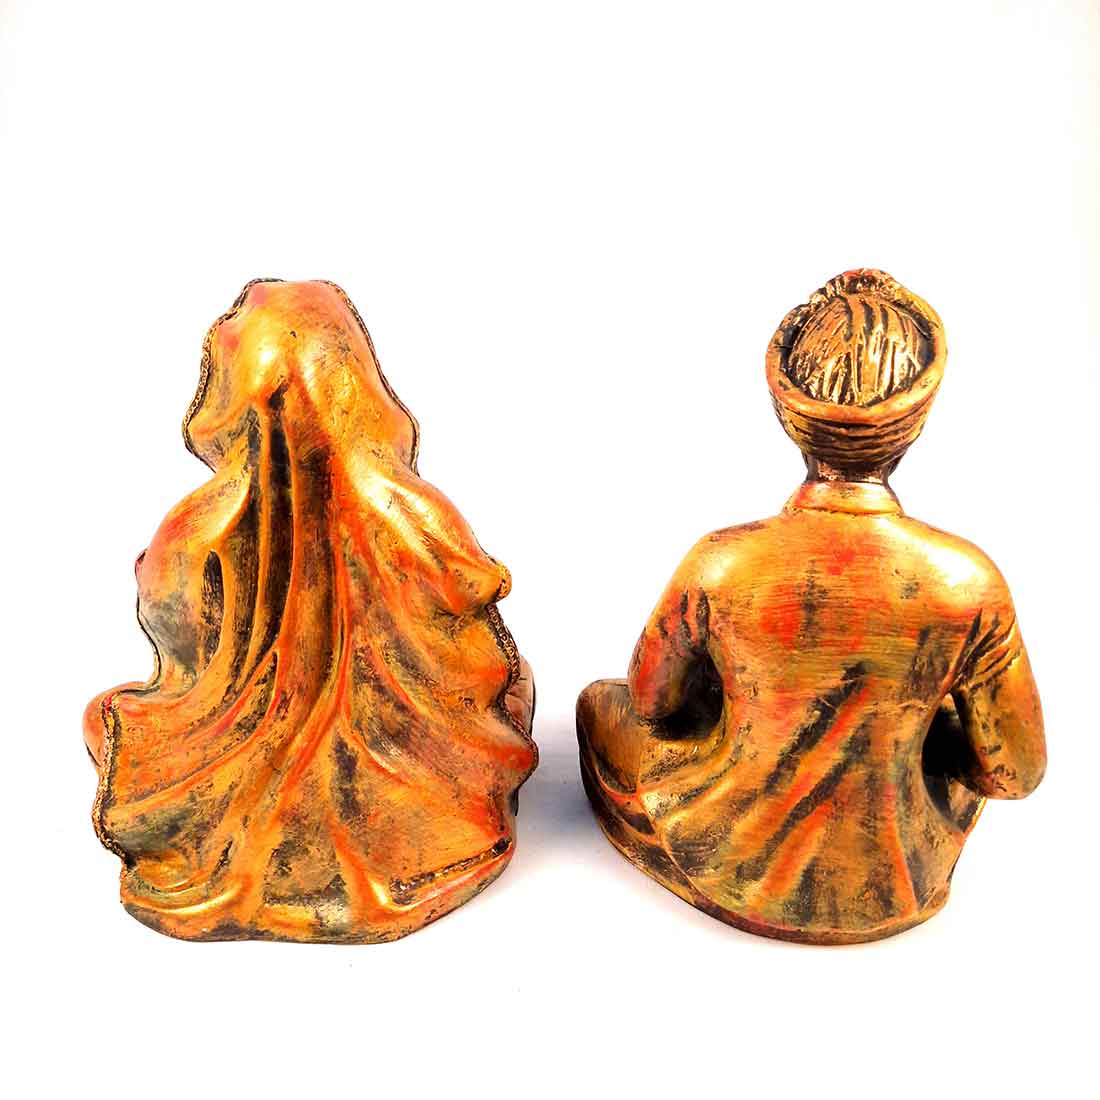 Couple Musician Showpiece - Human Figurine - For Living Room & Gifts - 11 Inch - Set of 2 - ApkaMart